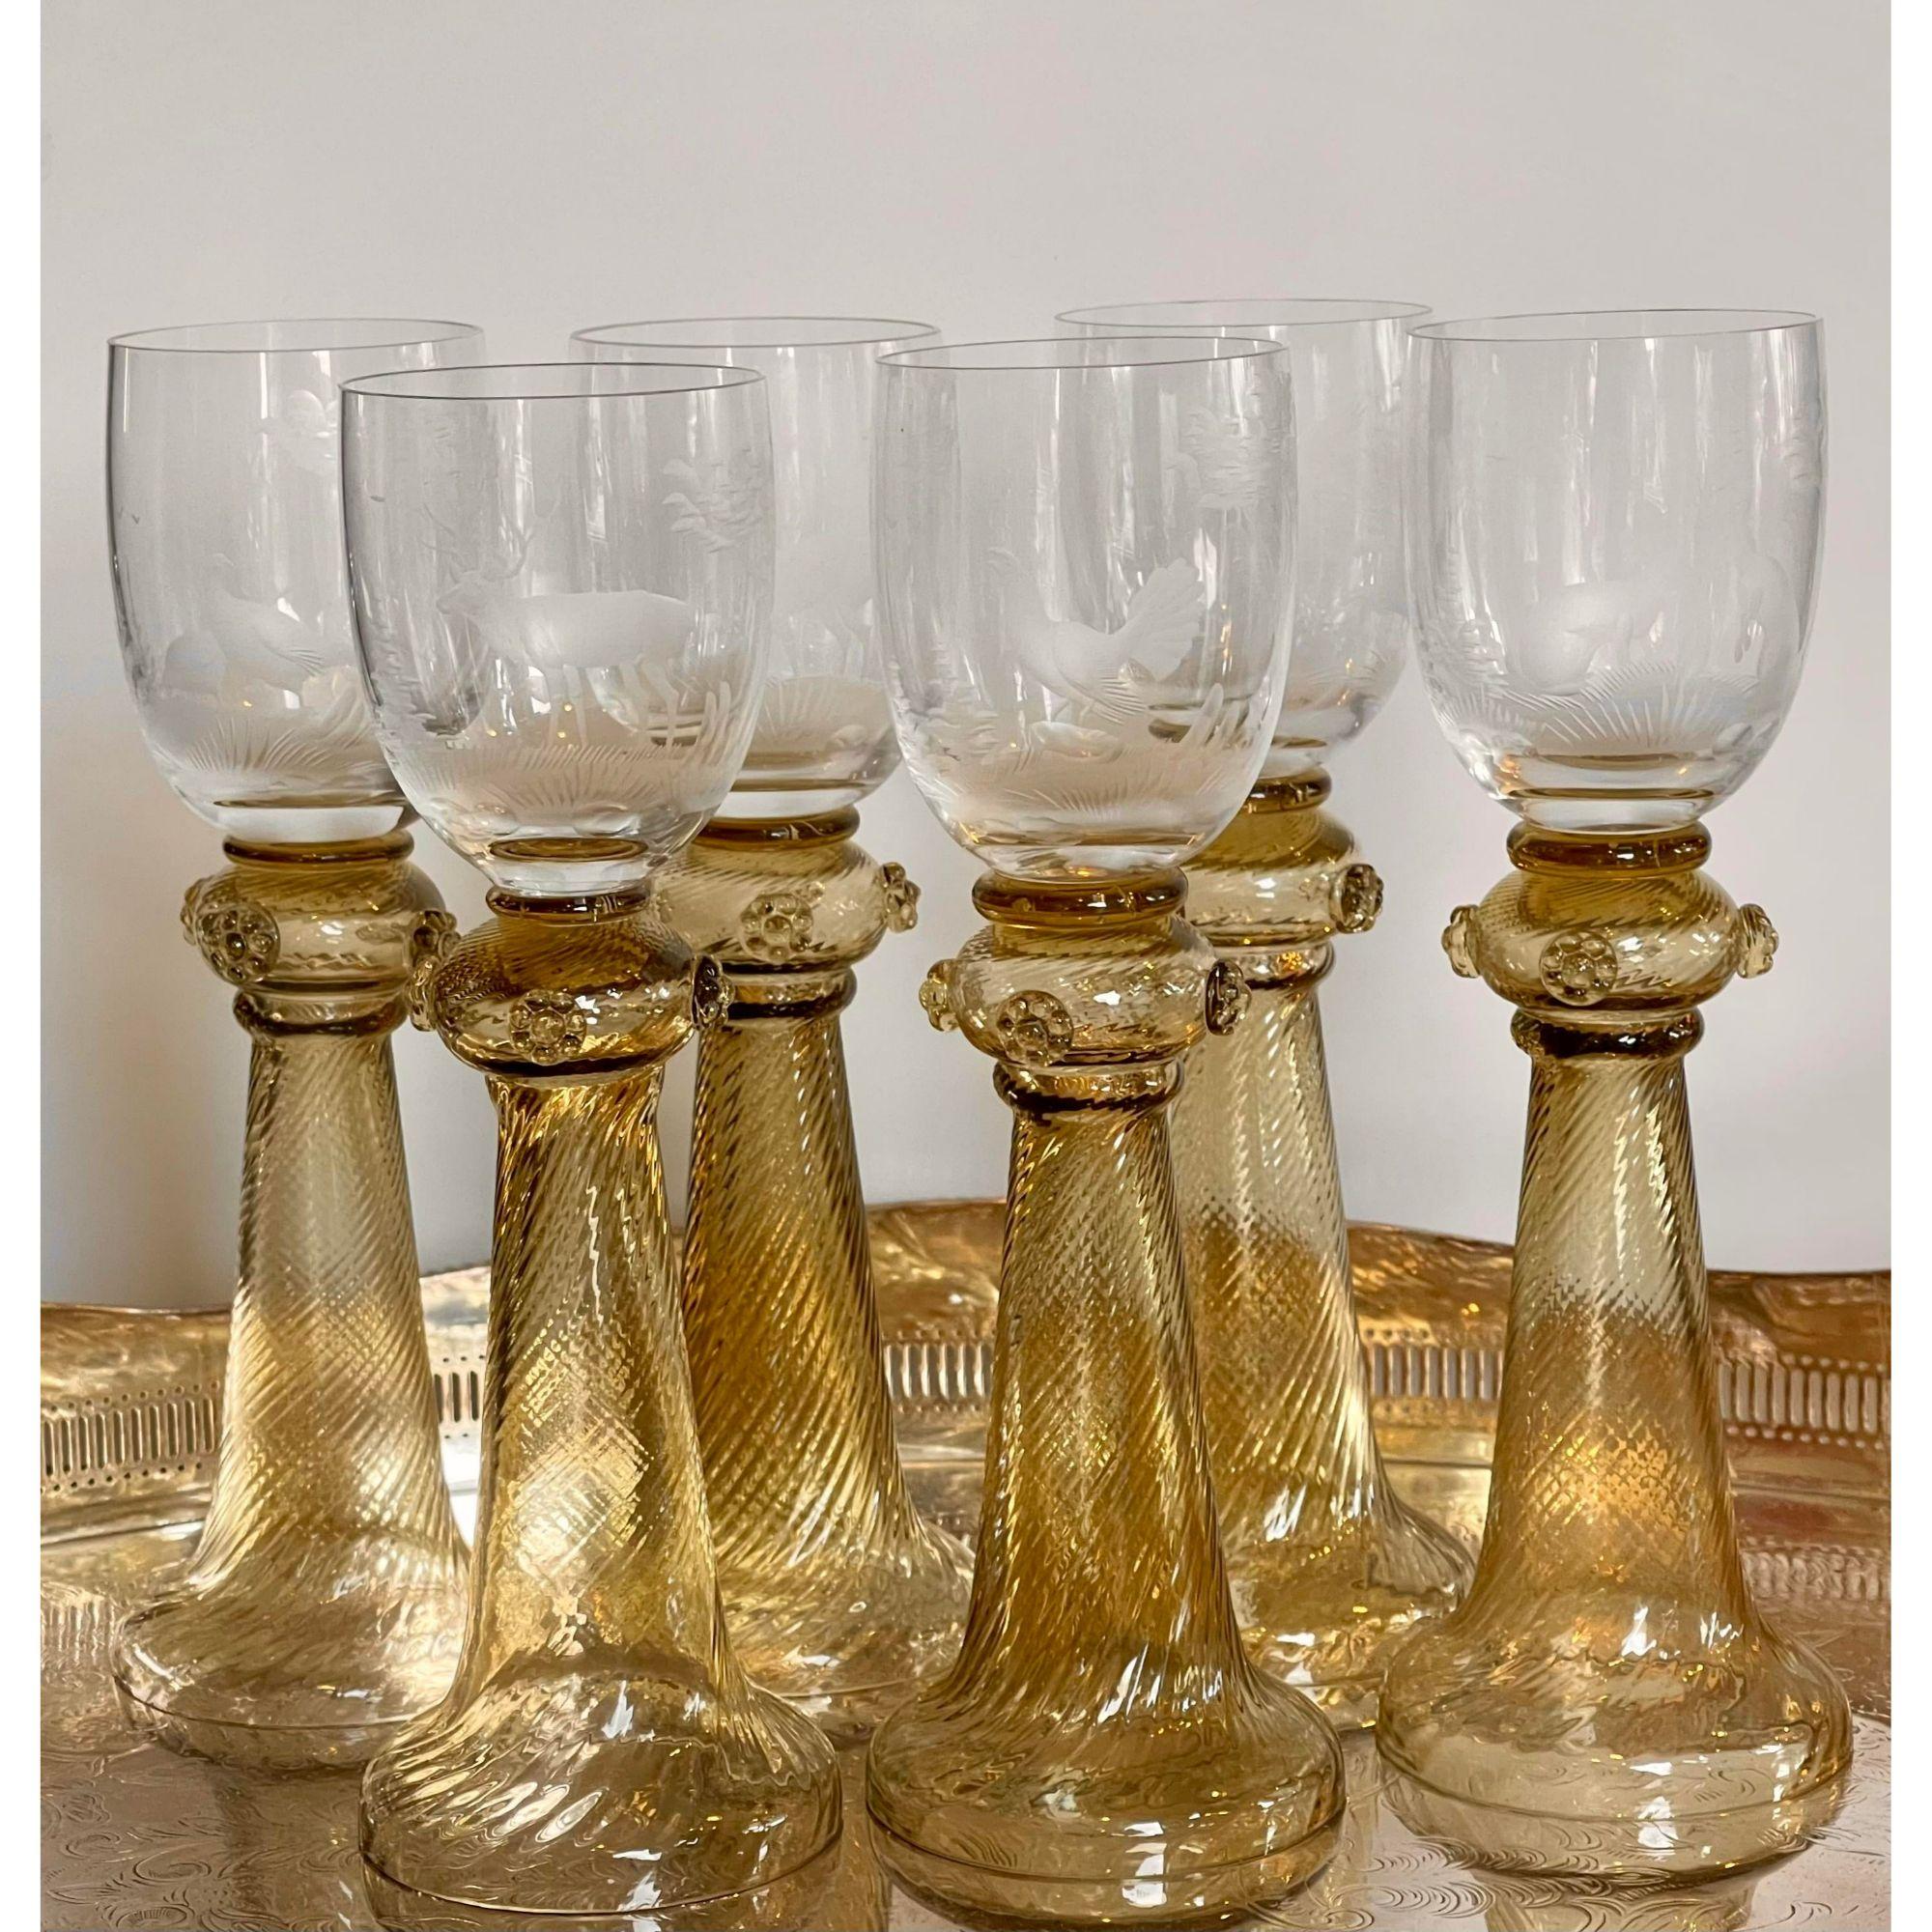 Gorsuch Glass Hunt Wine Stems W Engraved Animals. Each features an engraved game animal including rabbits, deer, pheasants. 

Additional information: 
Materials: Engraving, Venetian, Glass
Color: Yellow
Period: 19th Century
Styles: Boho Chic
Item